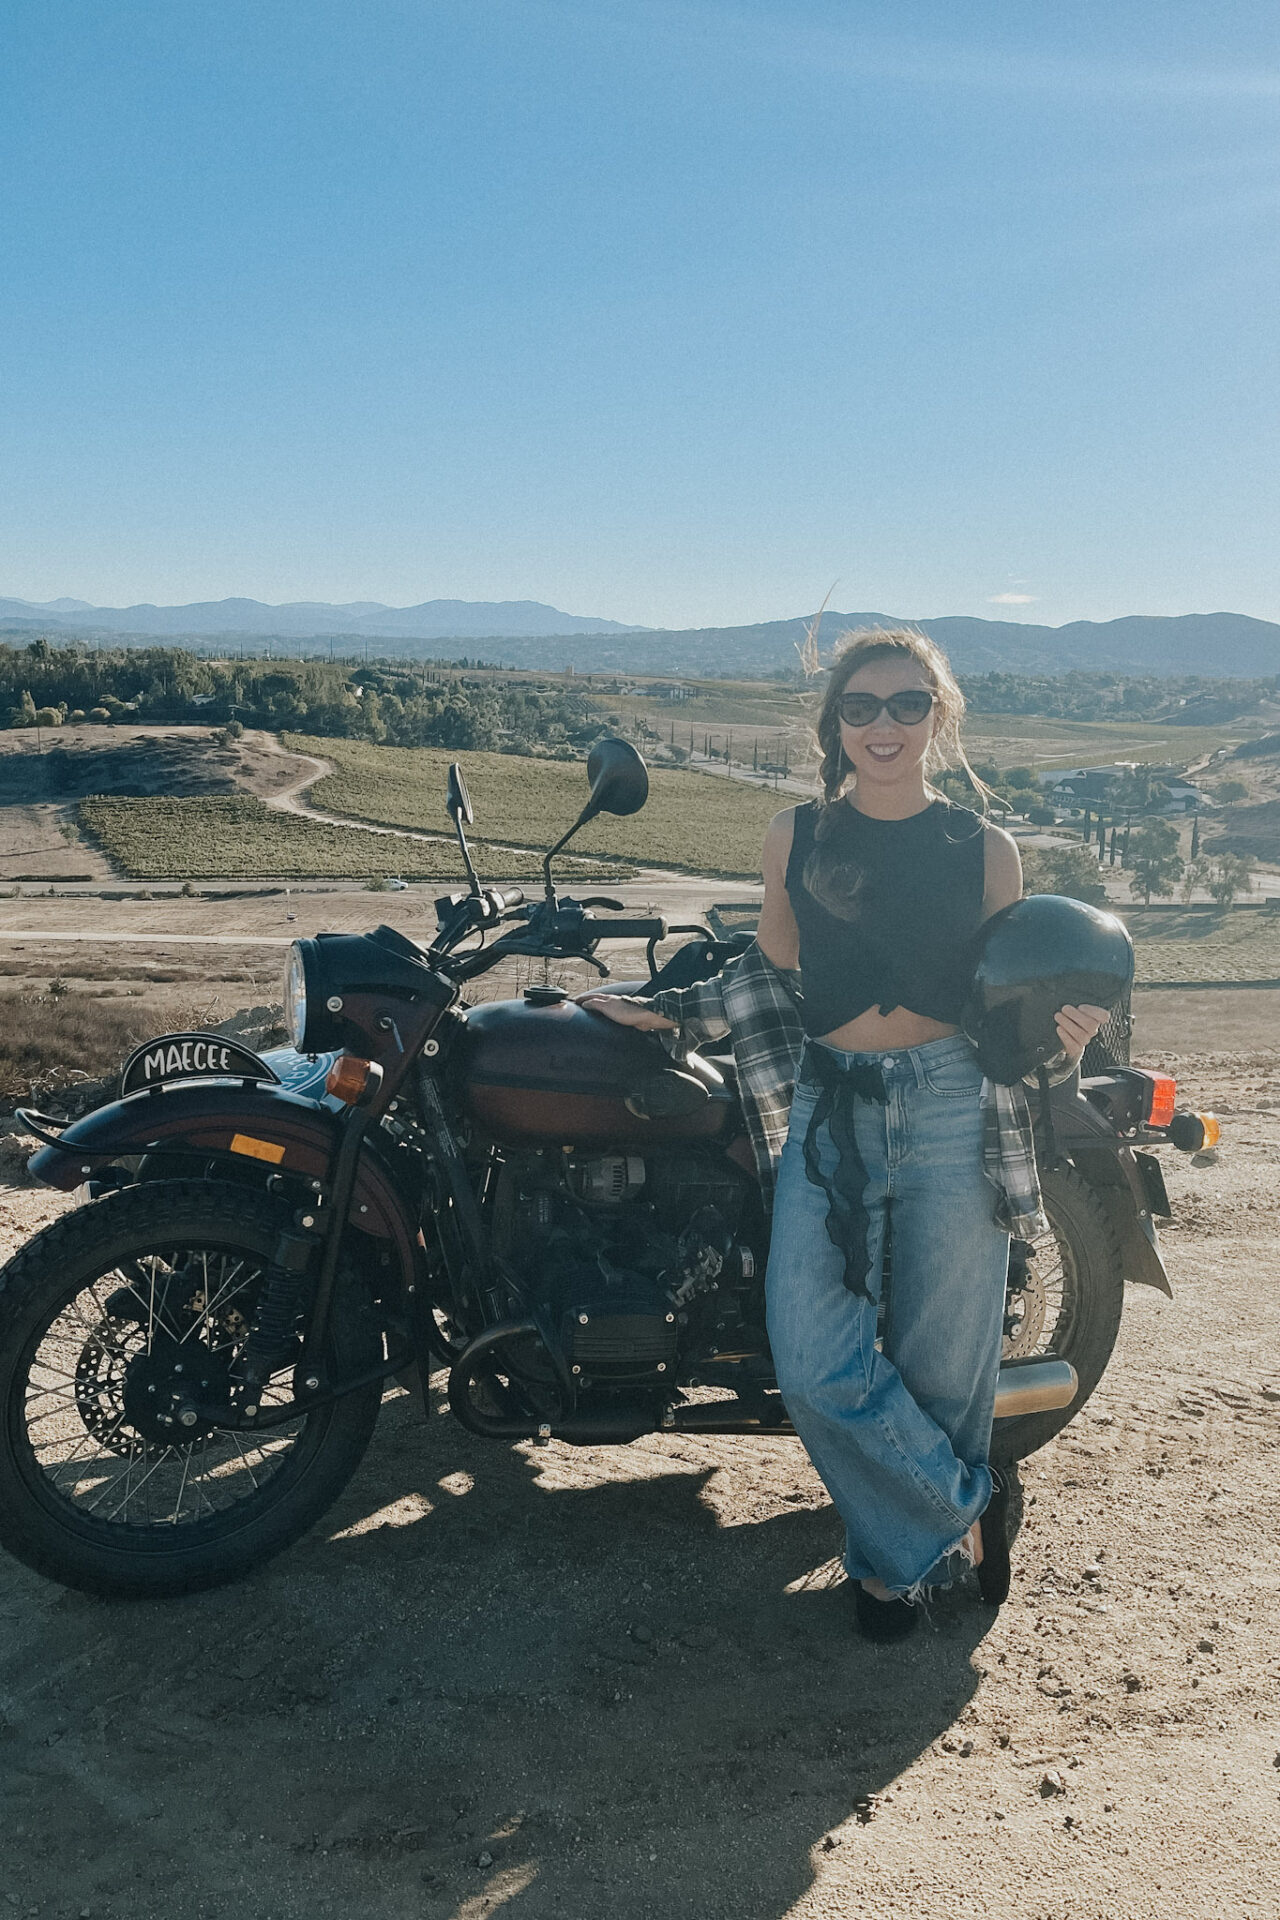 Paige next to a motorcycle sidecar in Temecula, CA